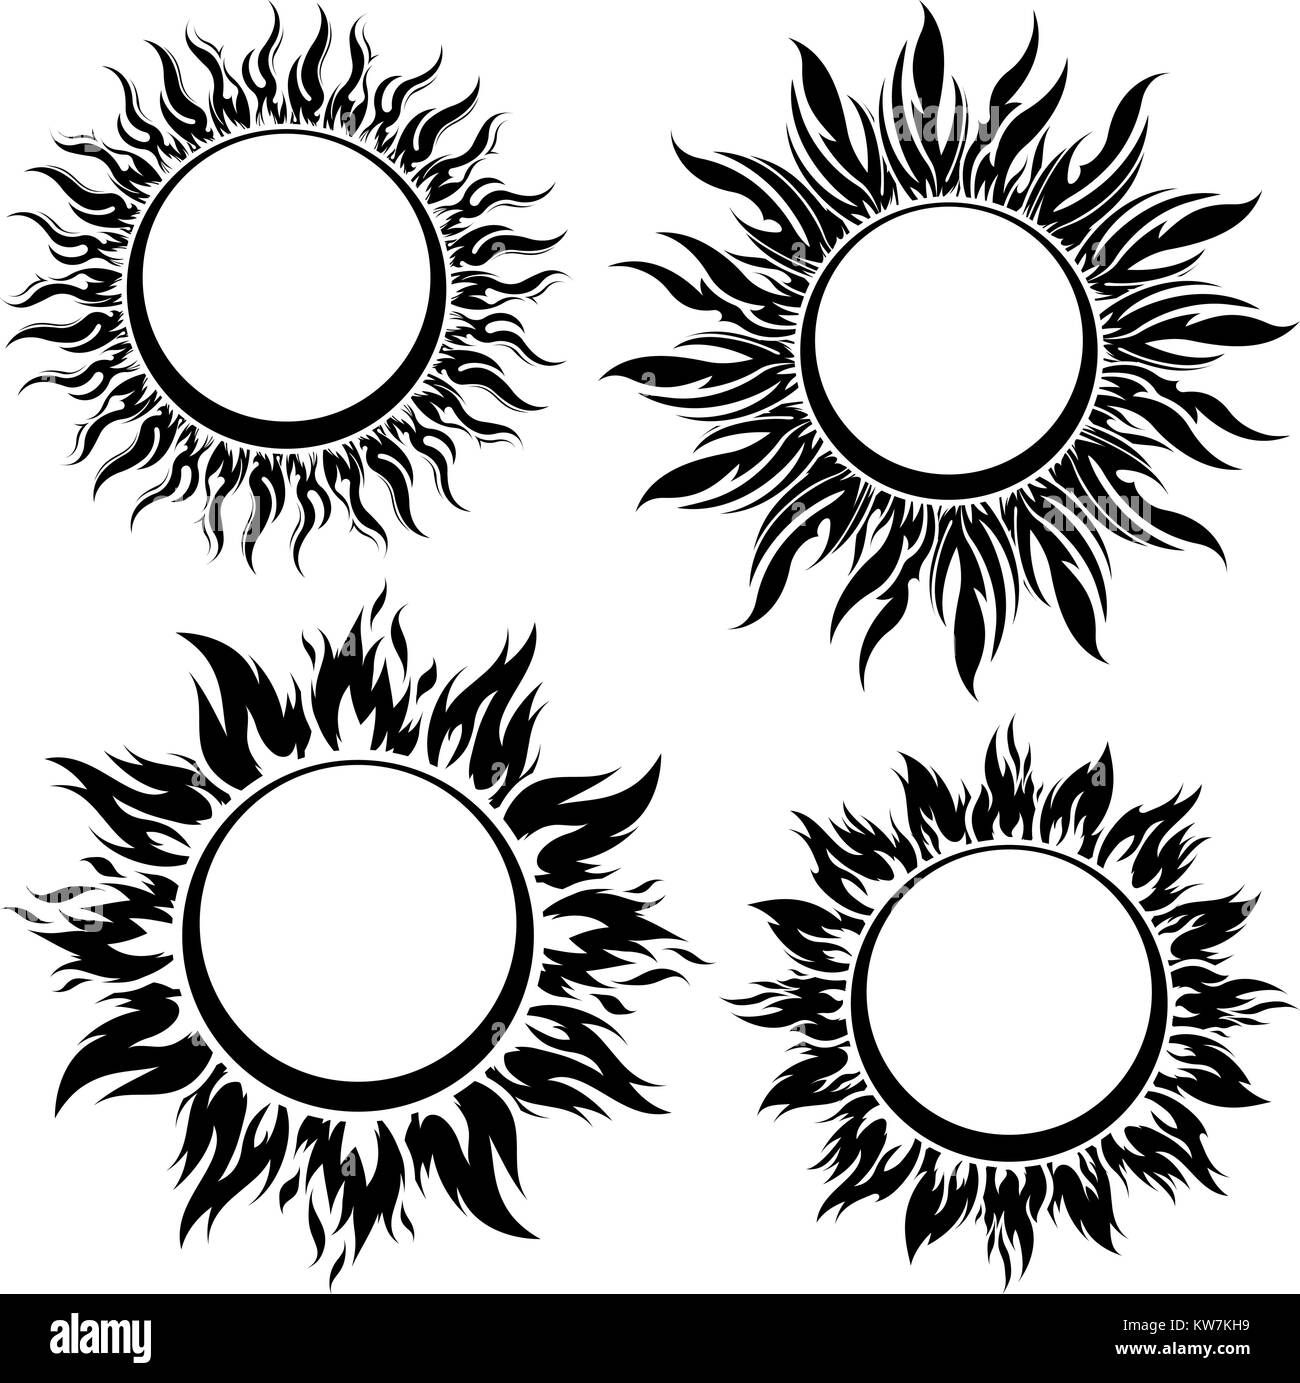 Set of decorative vector black sun symbols with long rays Stock Vector